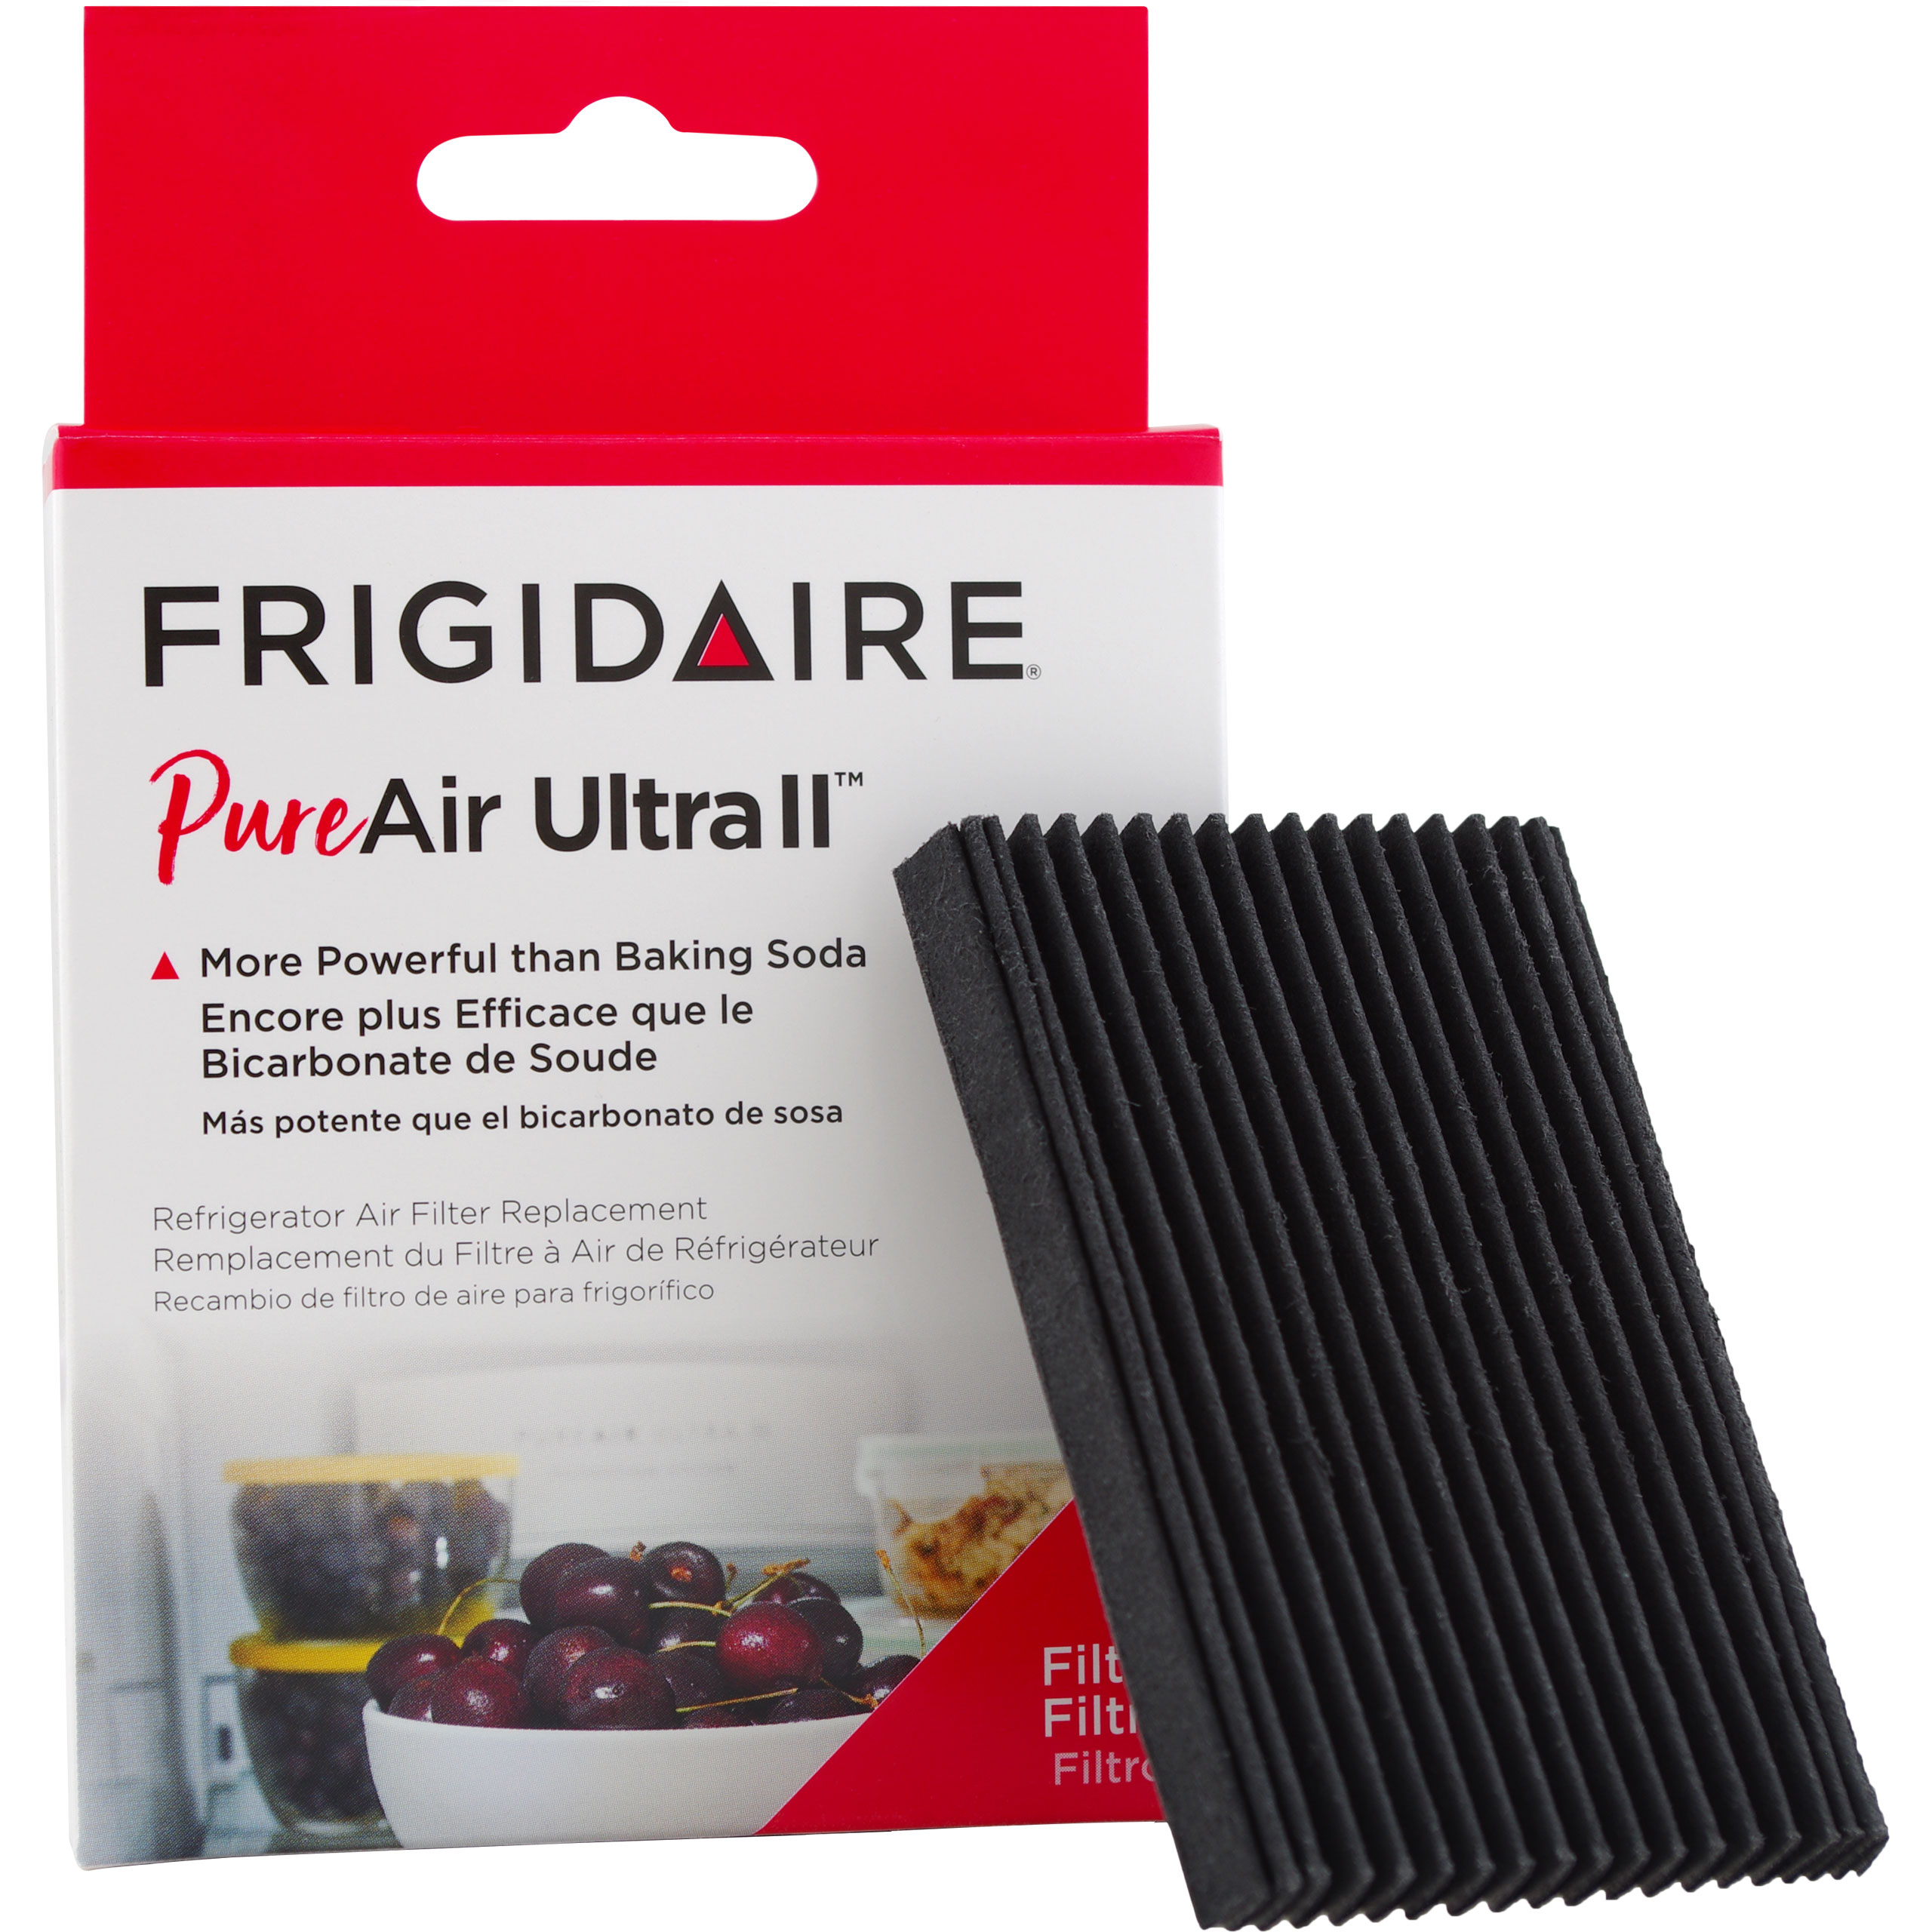 Paultra2 Frigidaire Refrigerator Air Filter Replacement Compatible with  Pure Air Ultra 2 Frigidaire Filter, Frigidaire Gallery Air Filter  Replacement